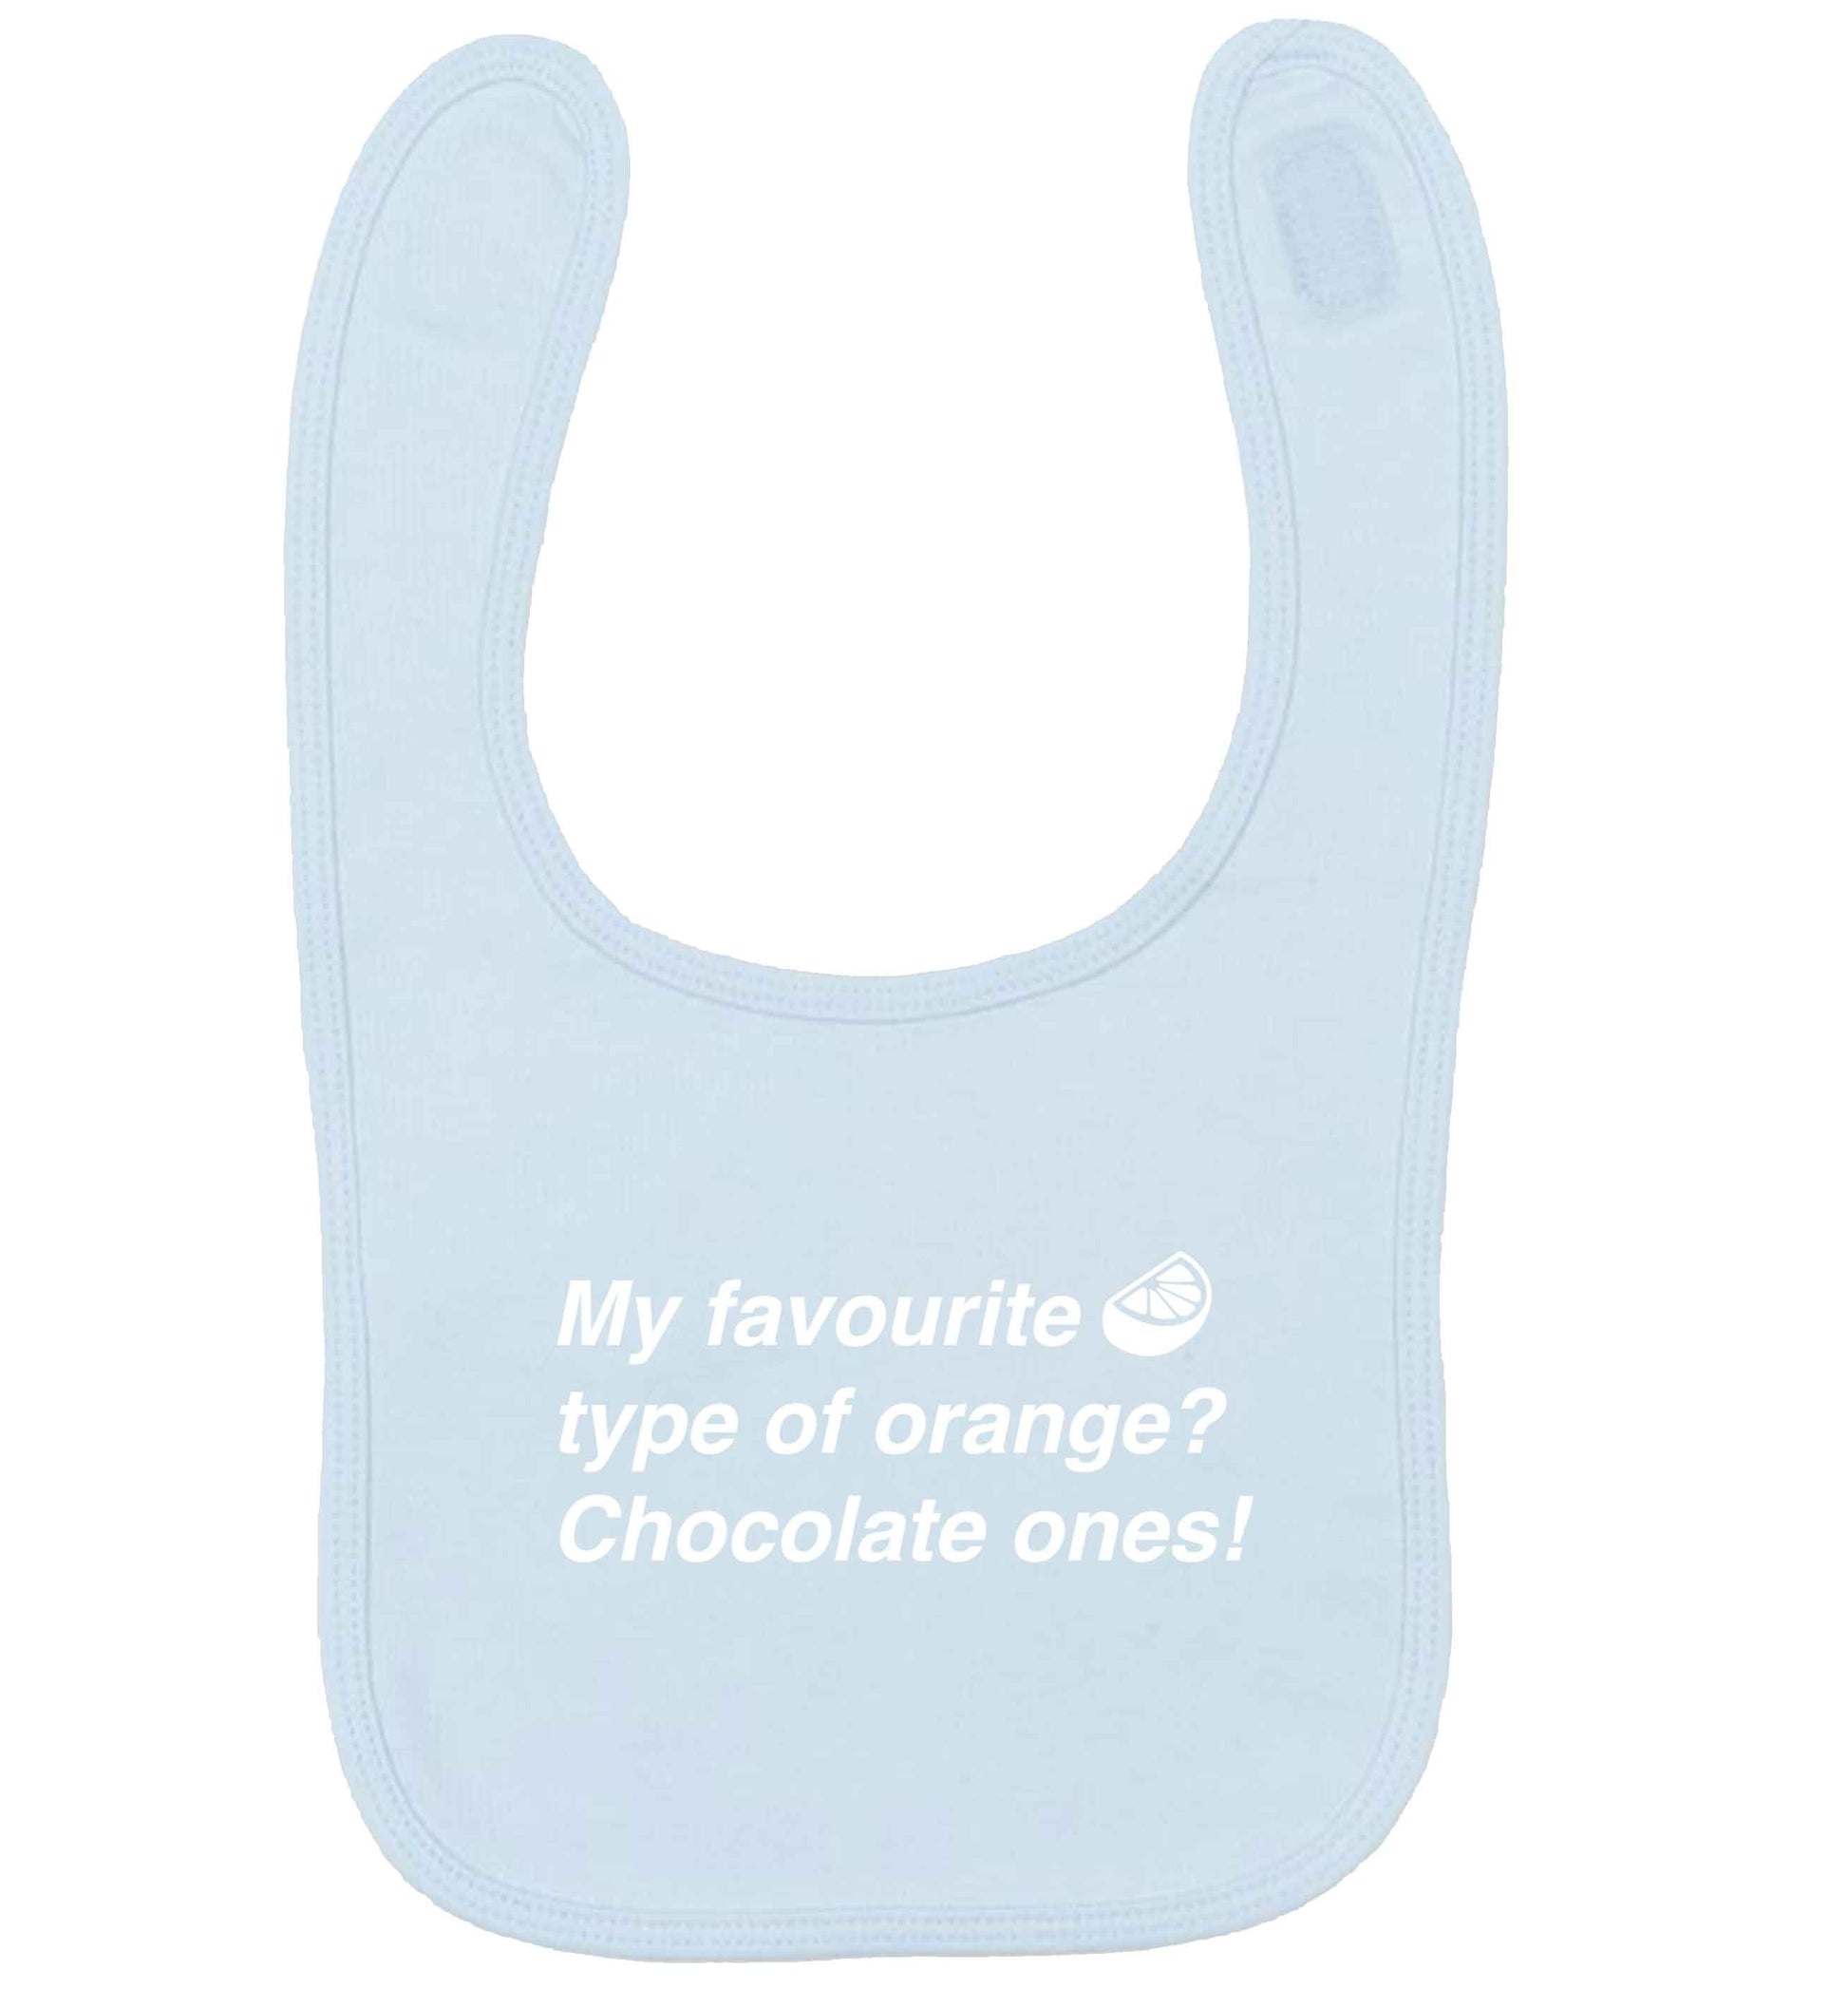 funny gift for a chocaholic! My favourite kind of oranges? Chocolate ones! pale blue baby bib